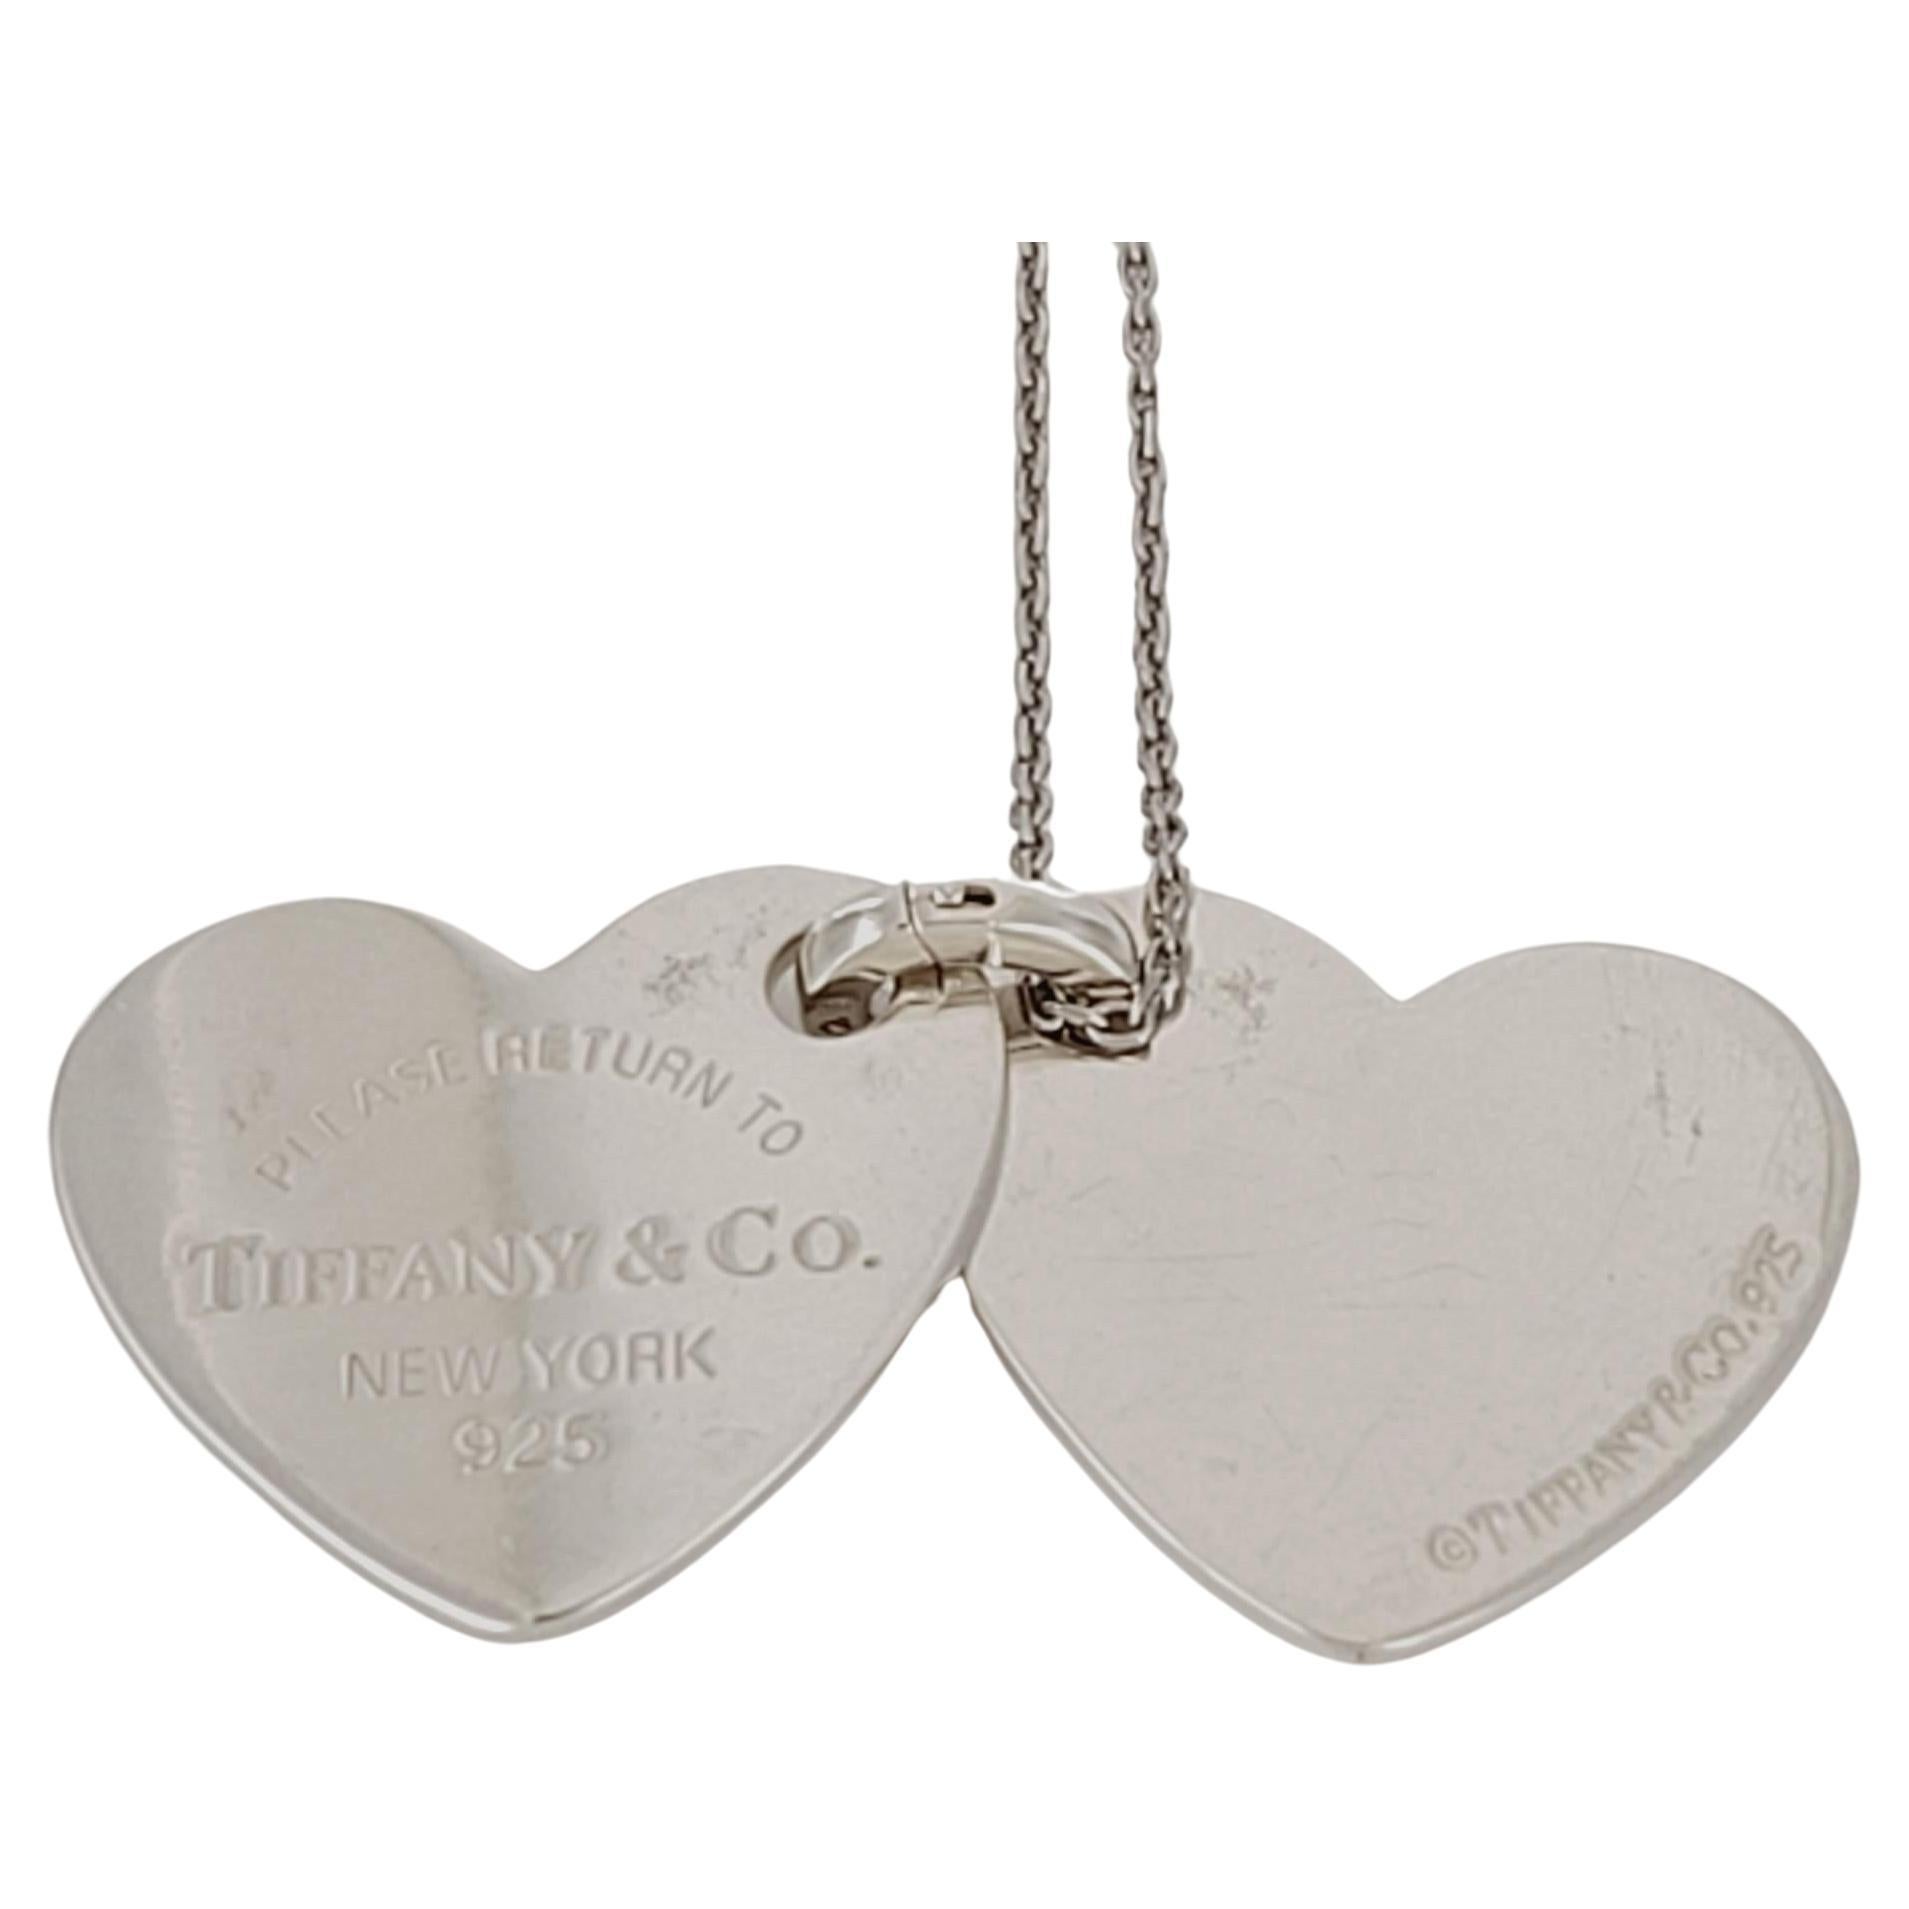 Brand Return To Tiffany & Co
Double Heart Charm Necklace
Material Sterling Silver925
Chain Length 18'' Long
Pendant Dimension 16mm X 18.4mm
Weight 12.0 gr in total
Condition Pre-owned  
Comes with Tiffany & Co Pouch